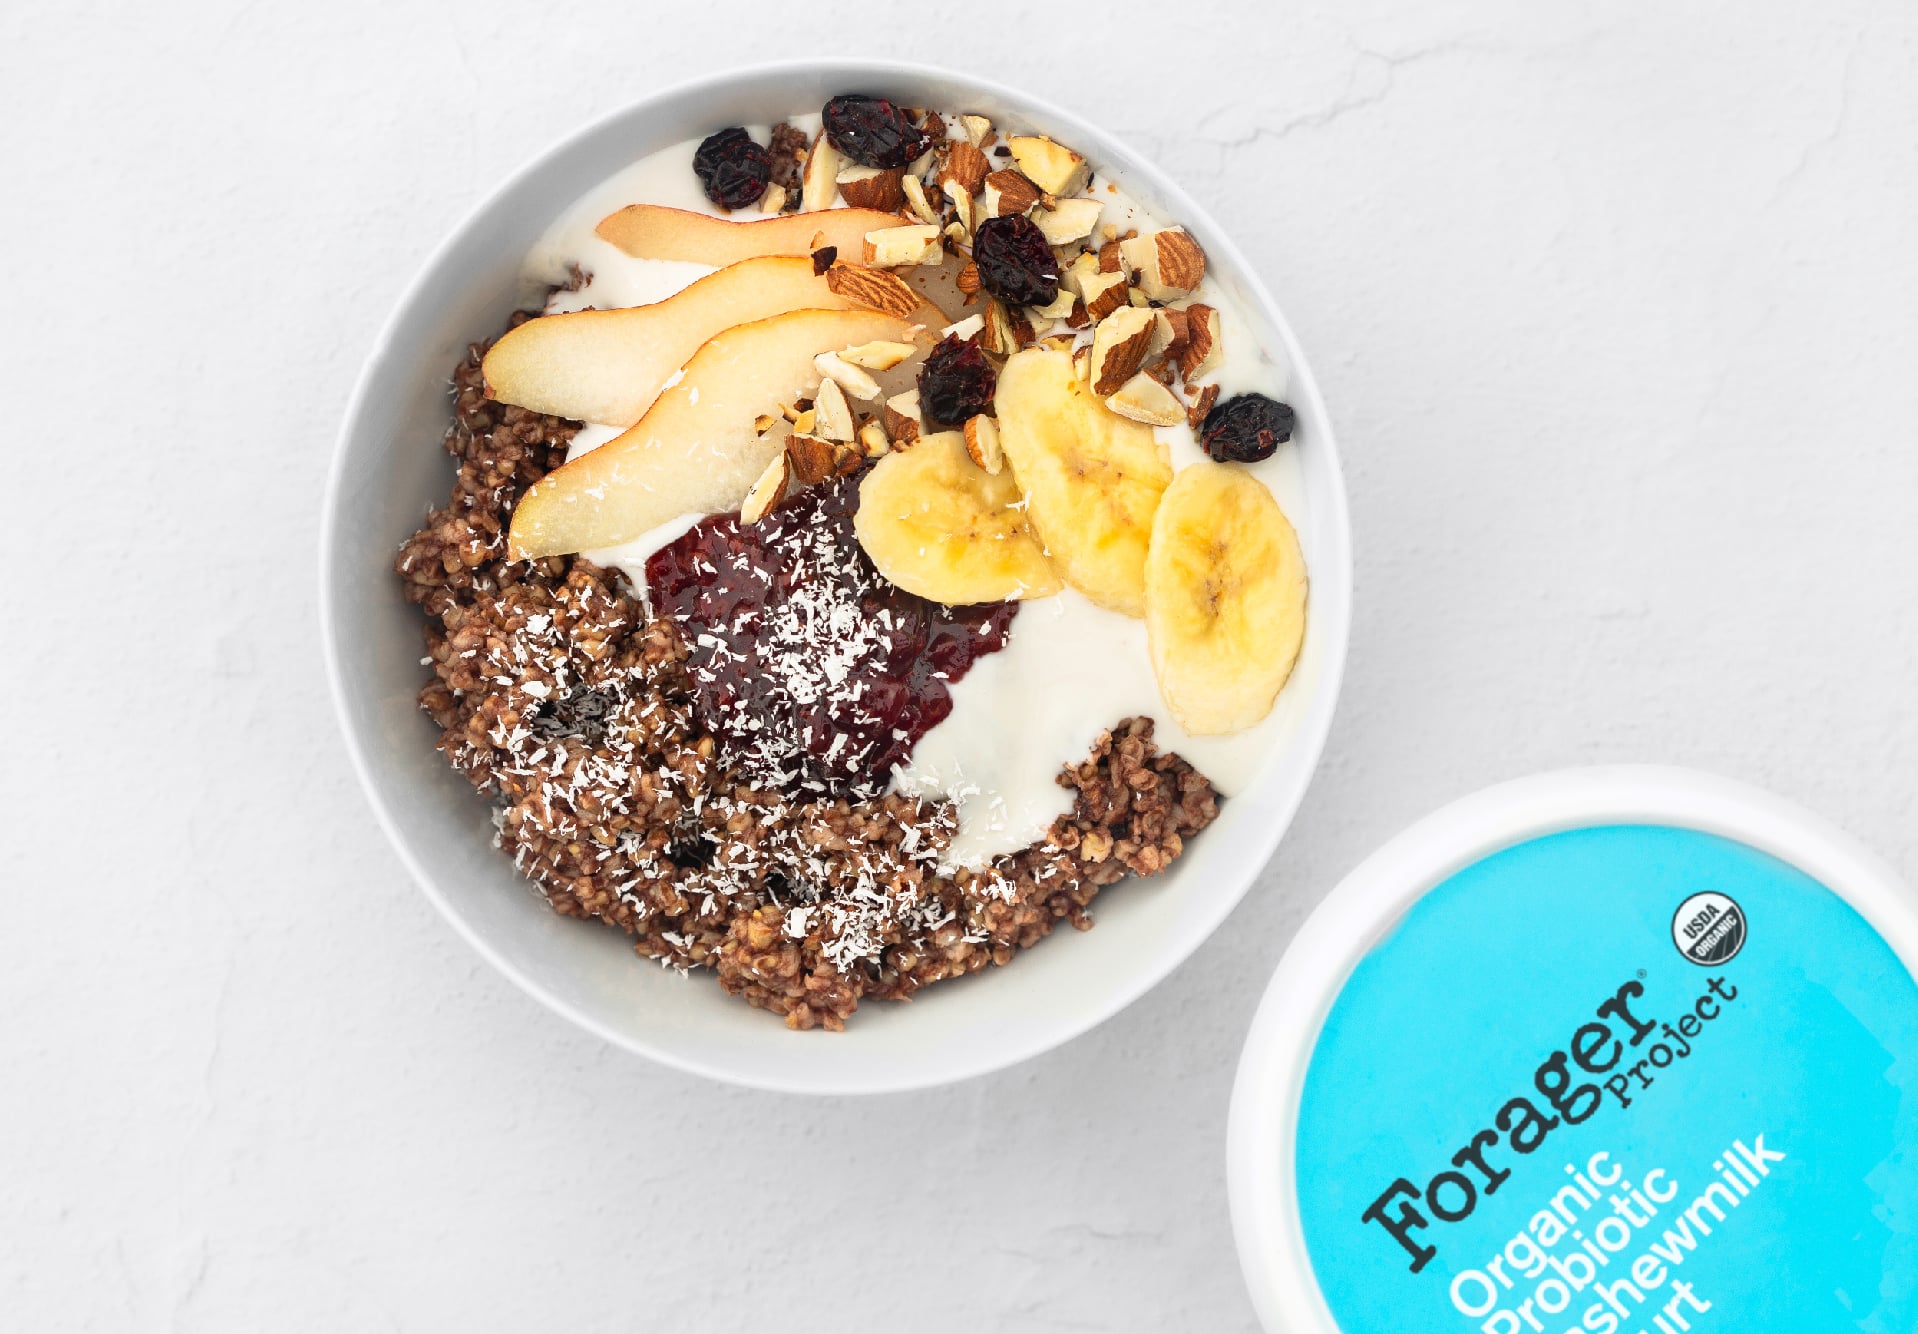 Breakfast bowl topped with pears, dried fruit, nuts, jam and shredded coconut.